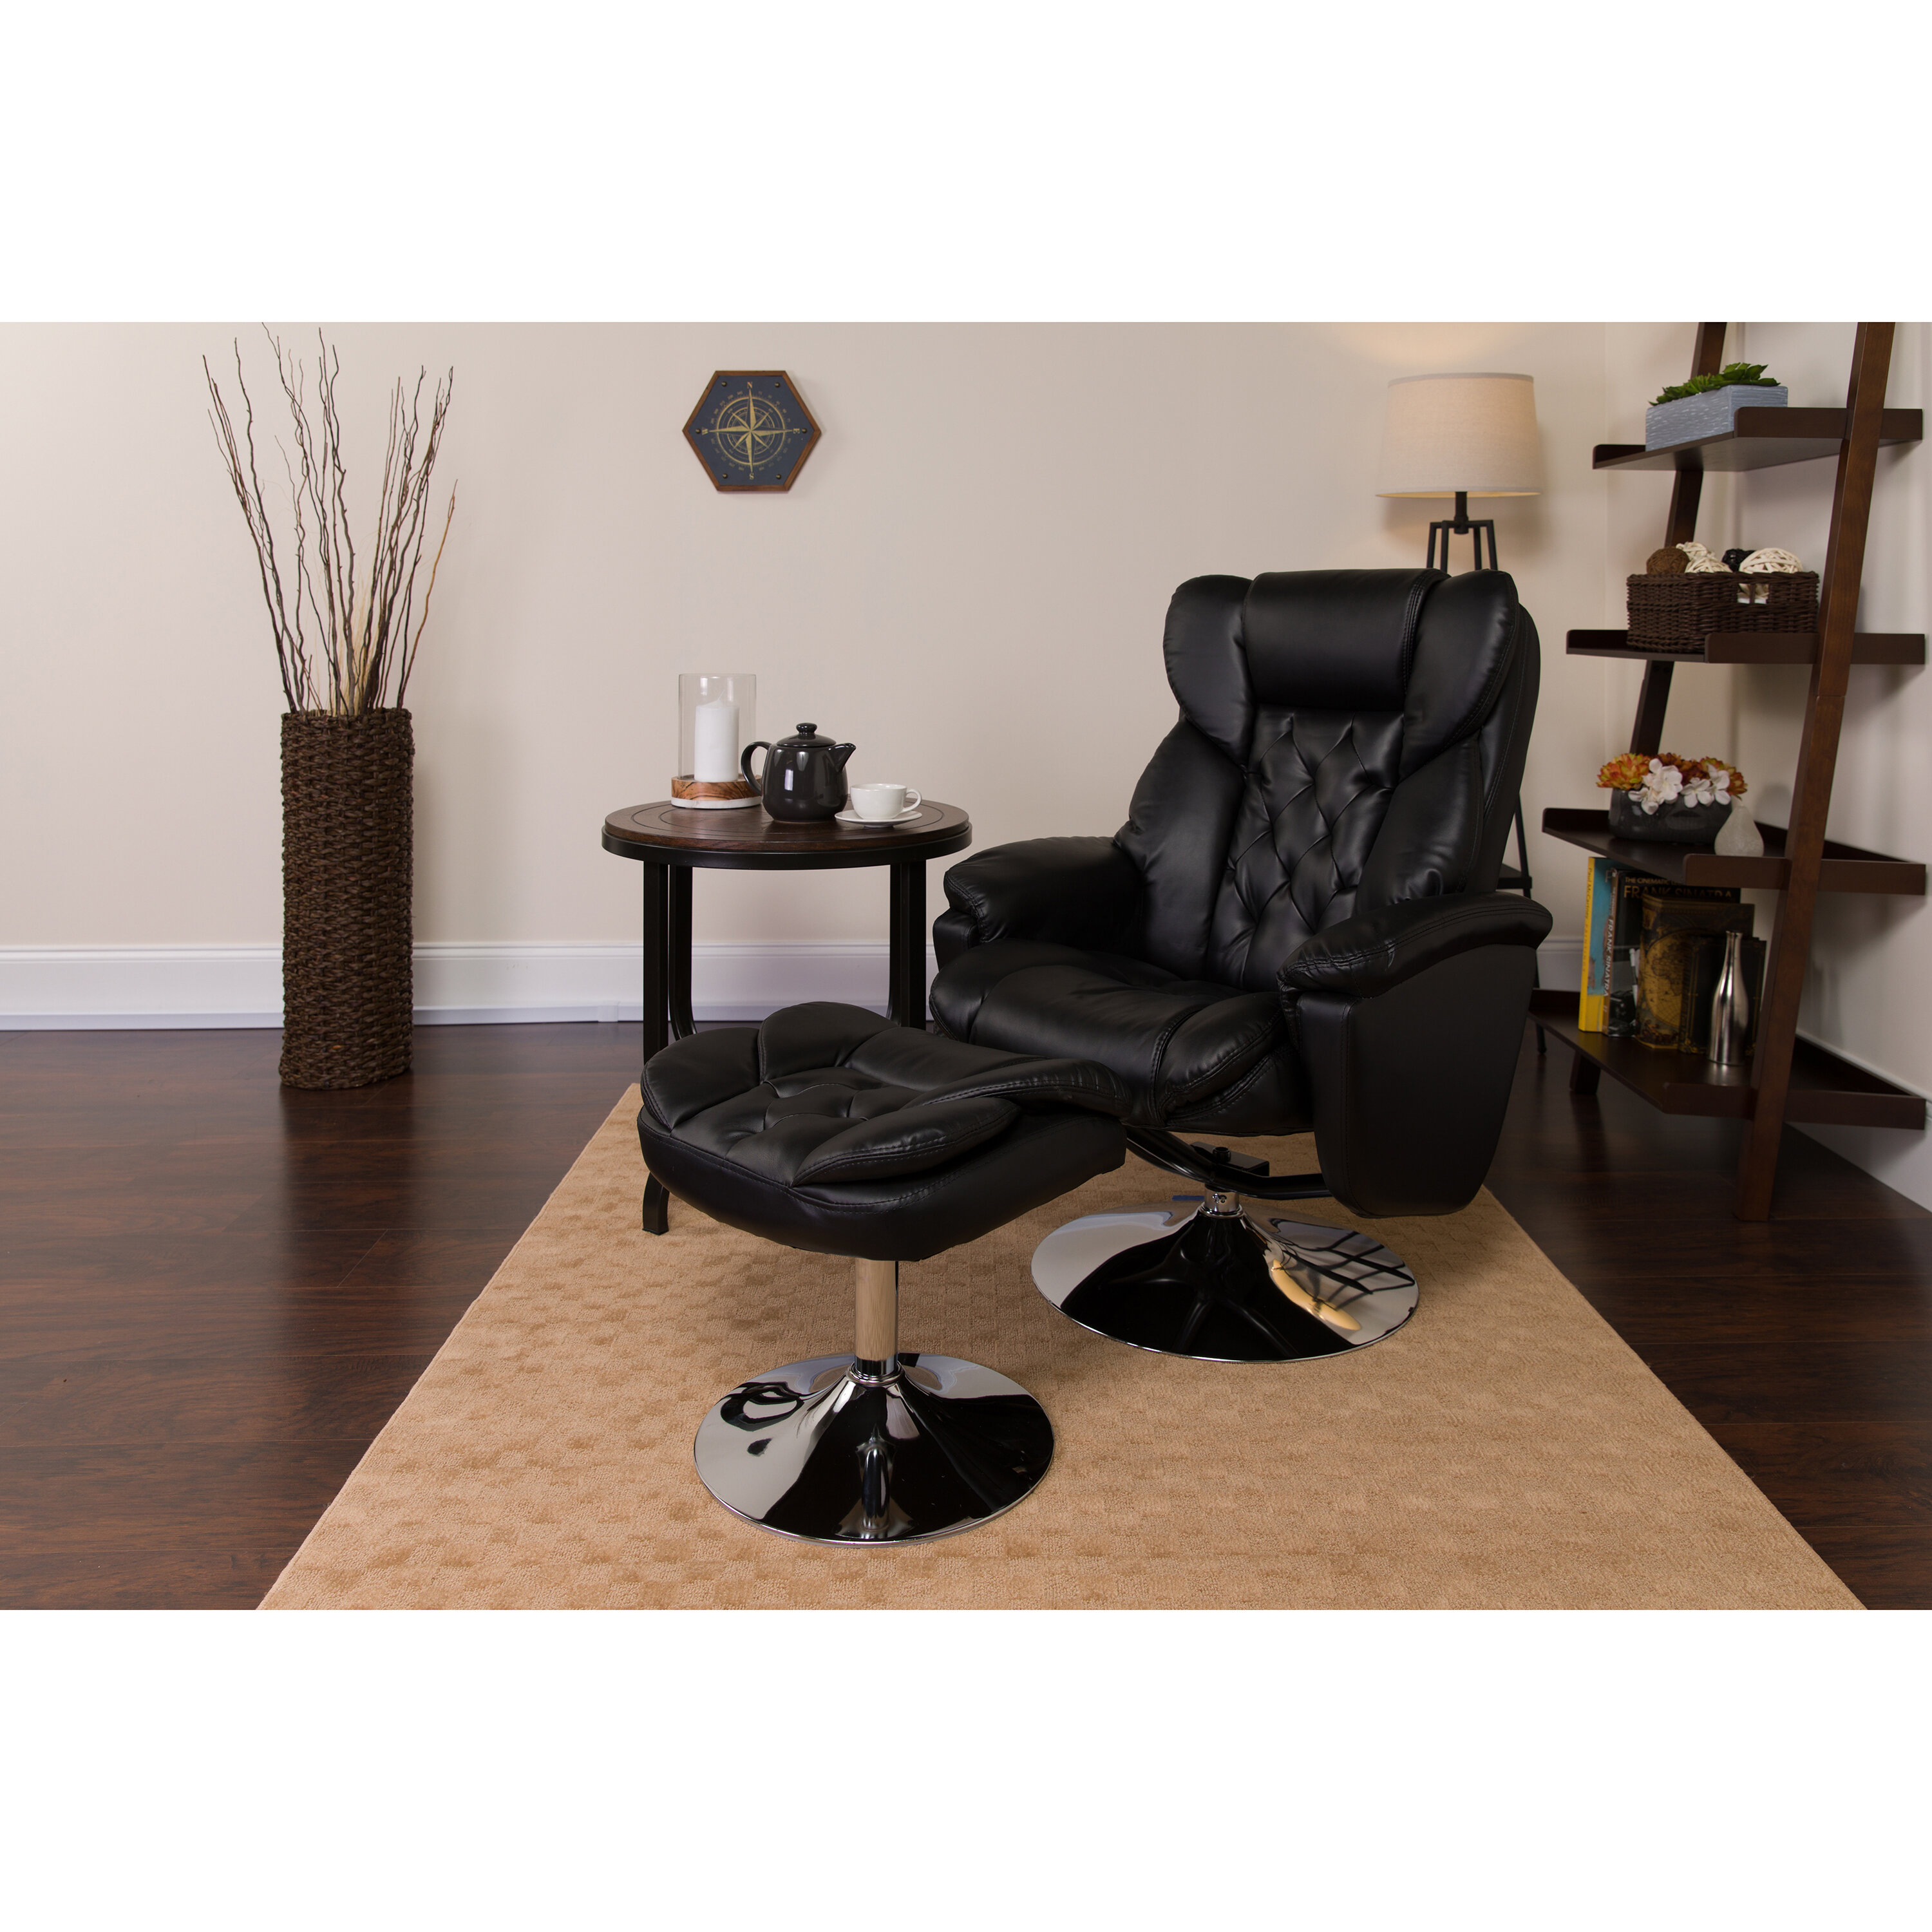 Beno 30” Wide Manual Swivel Standard Recliner with Ottoman